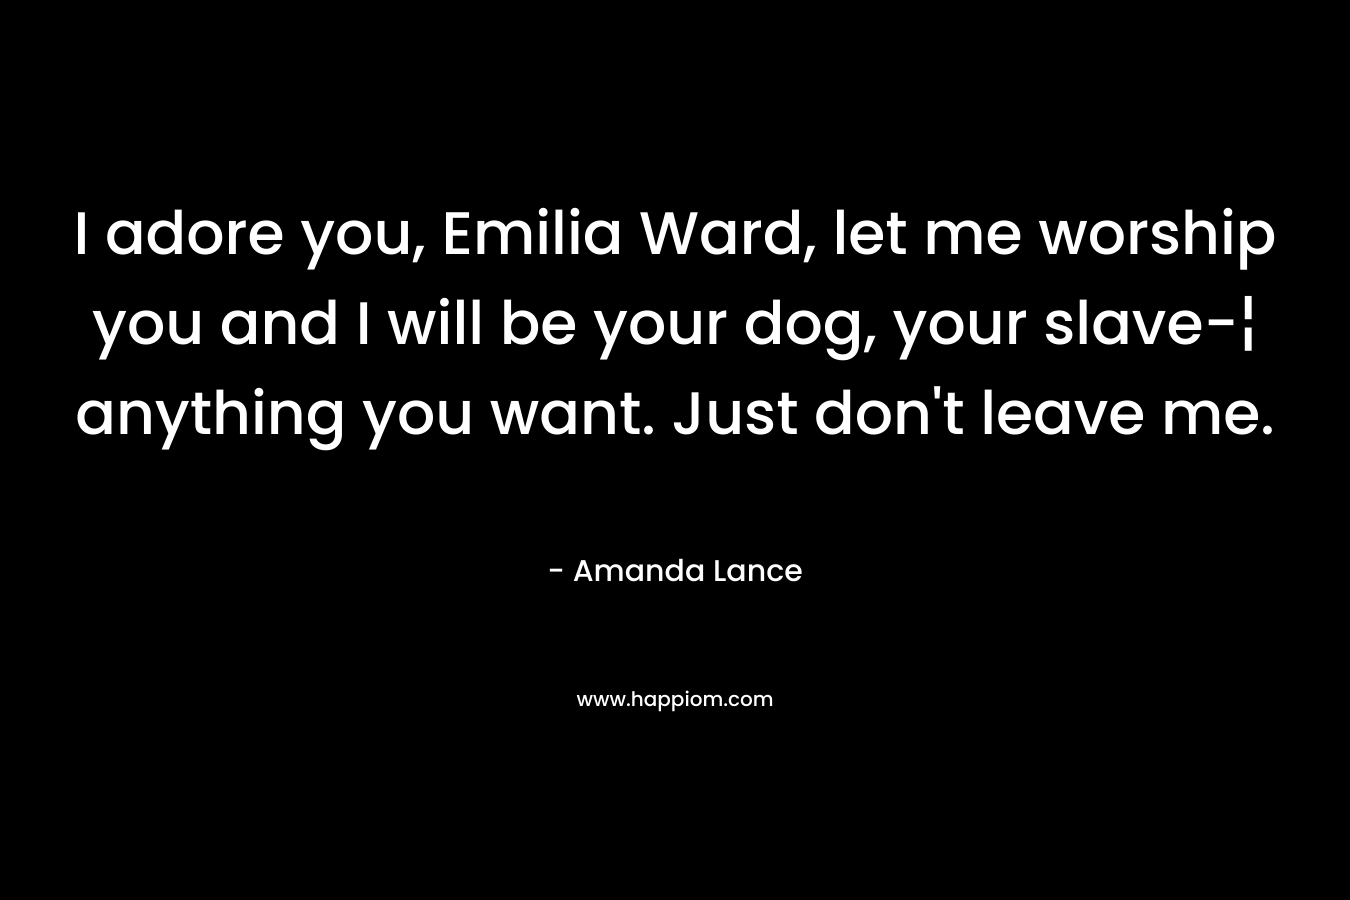 I adore you, Emilia Ward, let me worship you and I will be your dog, your slave-¦ anything you want. Just don't leave me.